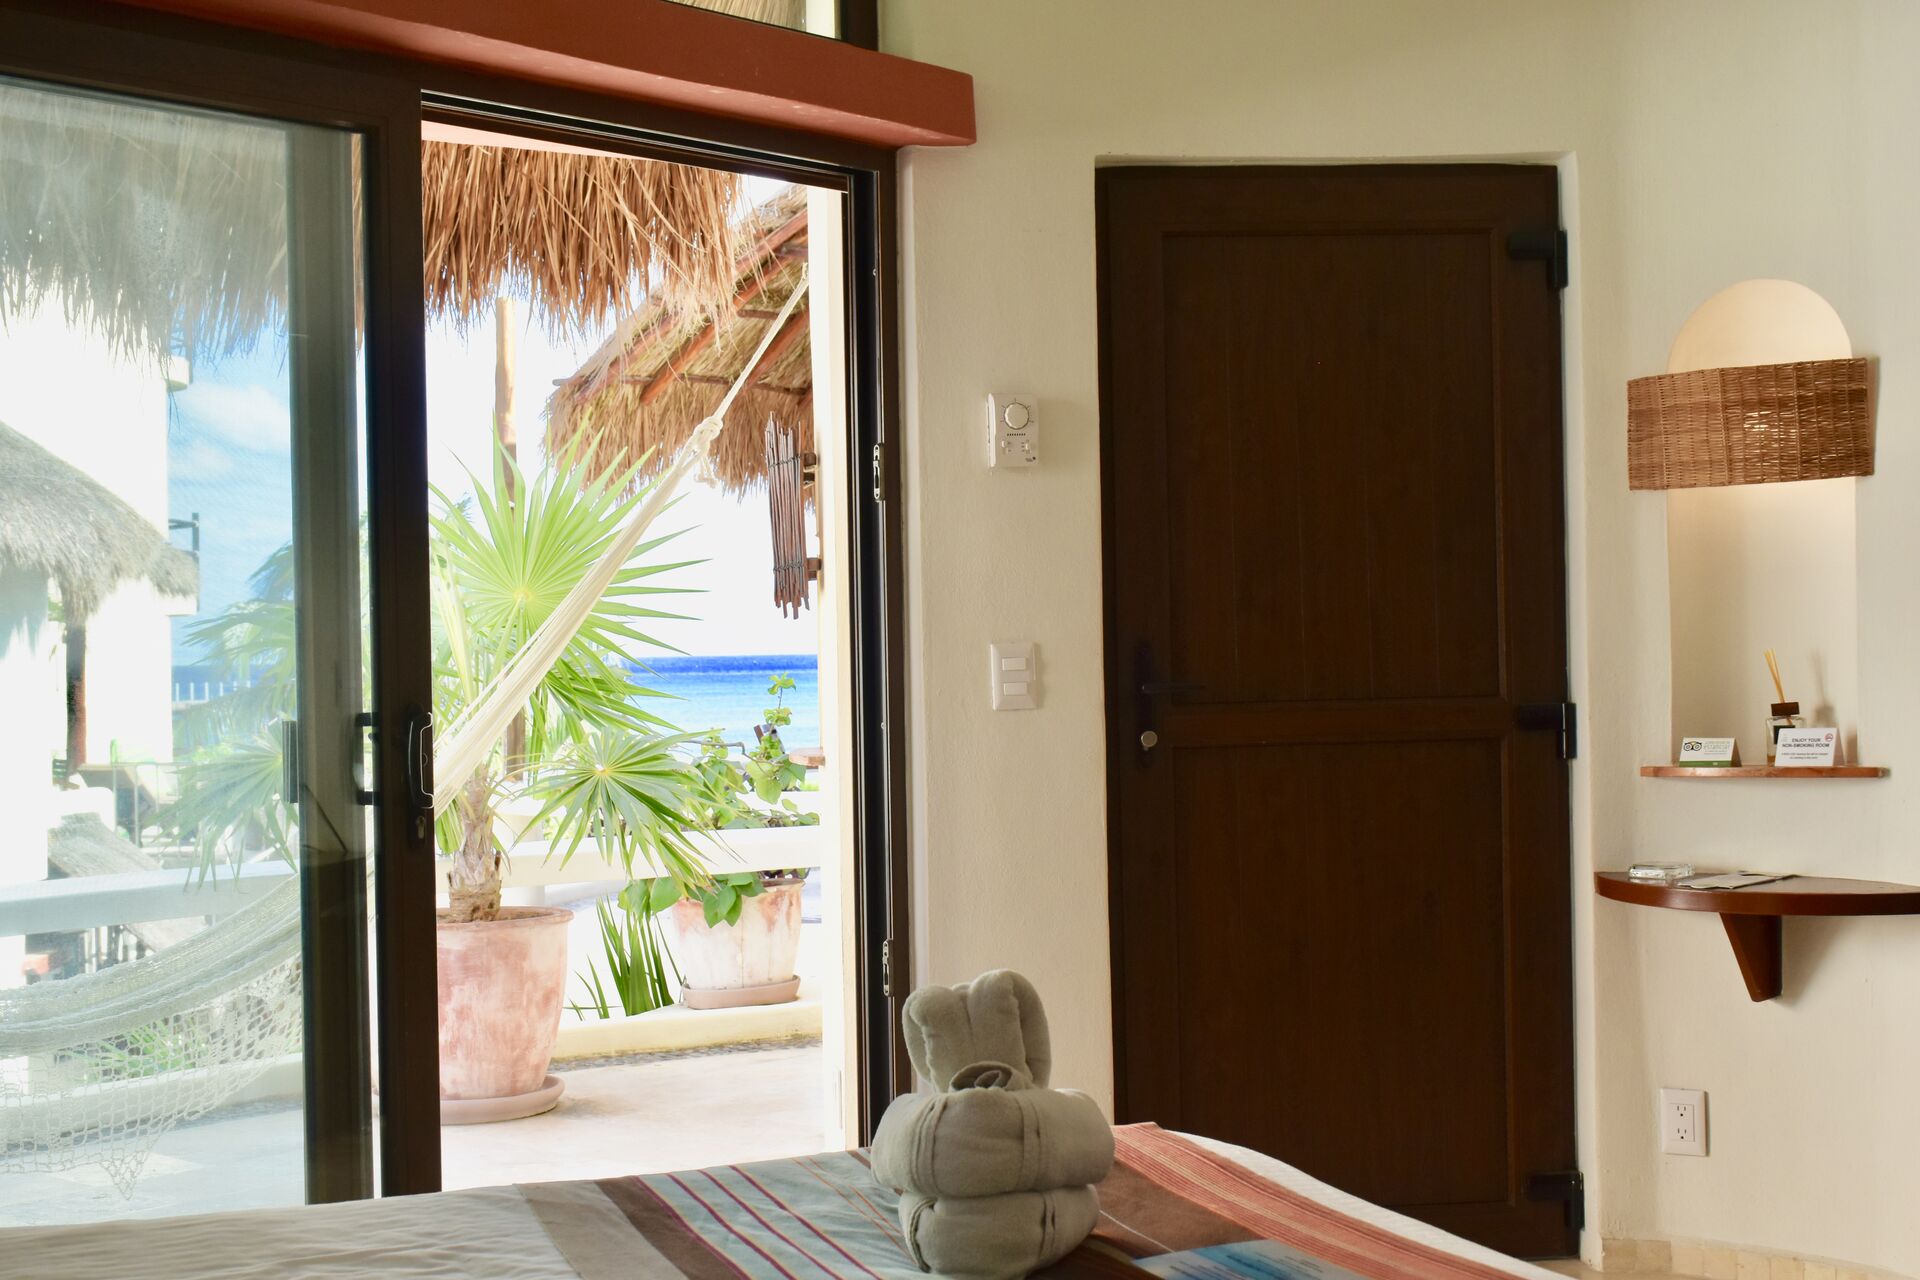 Fully furnished ocean view suite with king size bed and kitchenette.